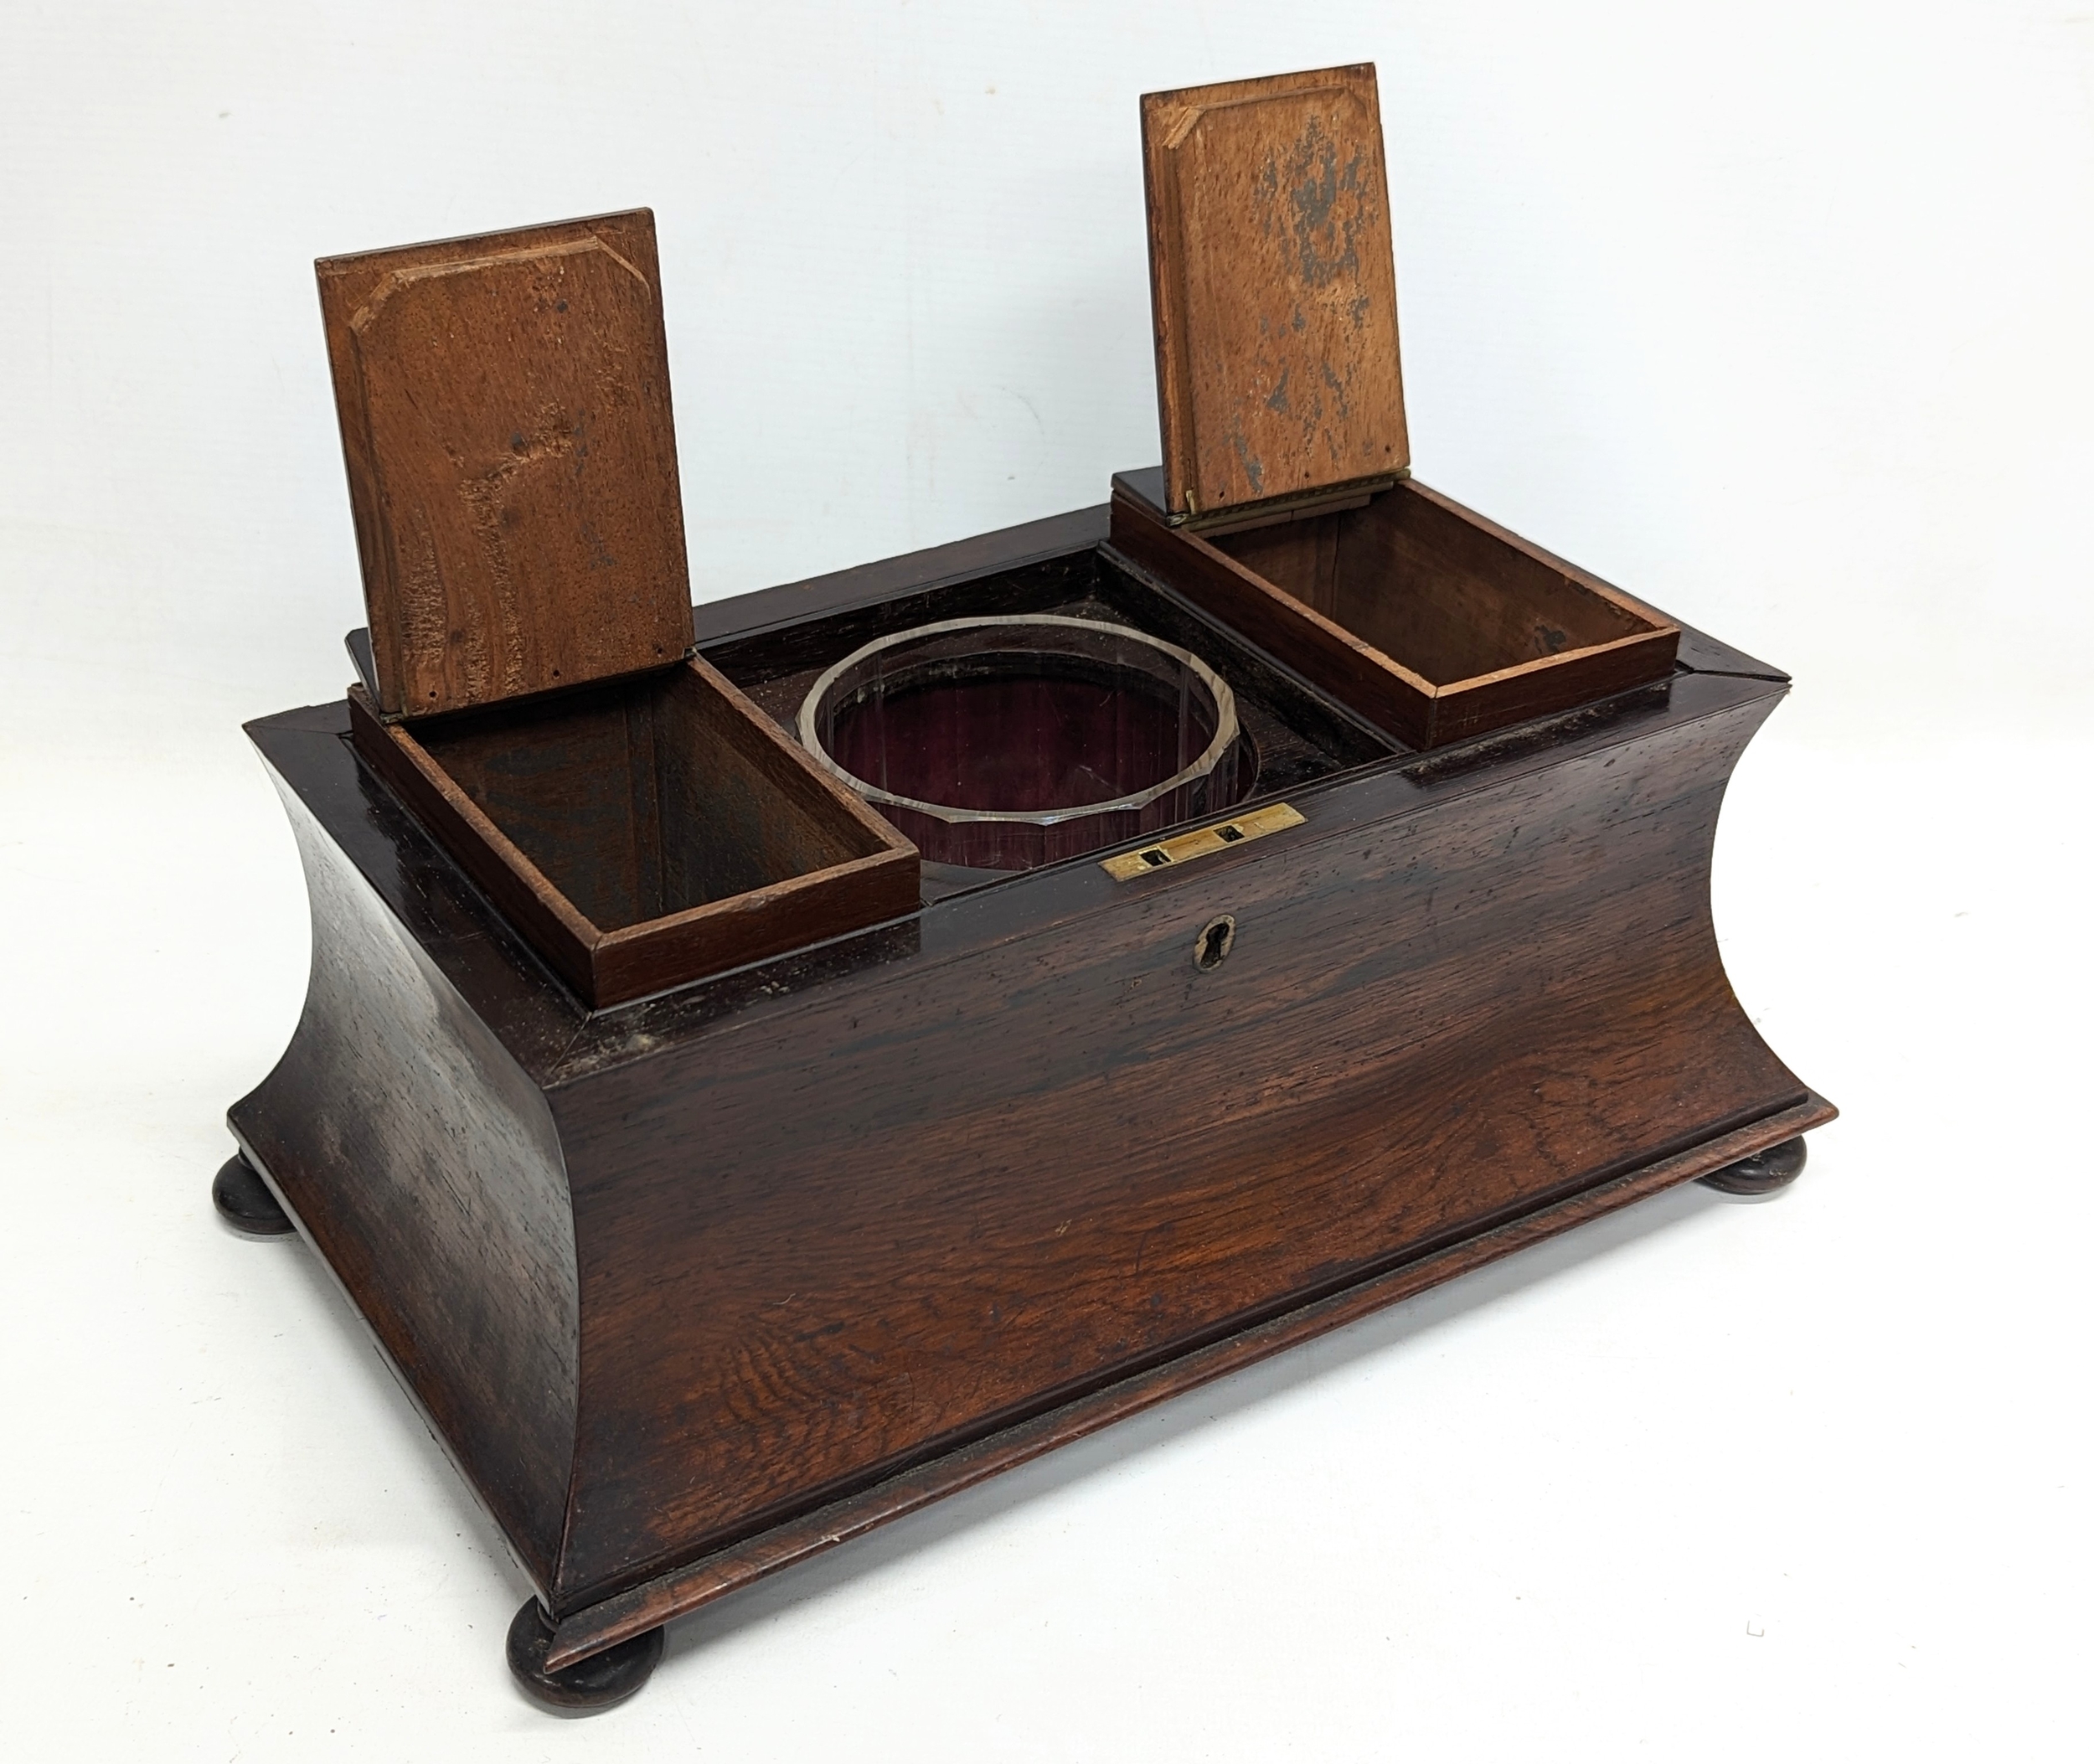 A large Regency rosewood tea caddy in sarcophagus shape, circa 1810. 37x21.5x22.5cm - Image 3 of 5